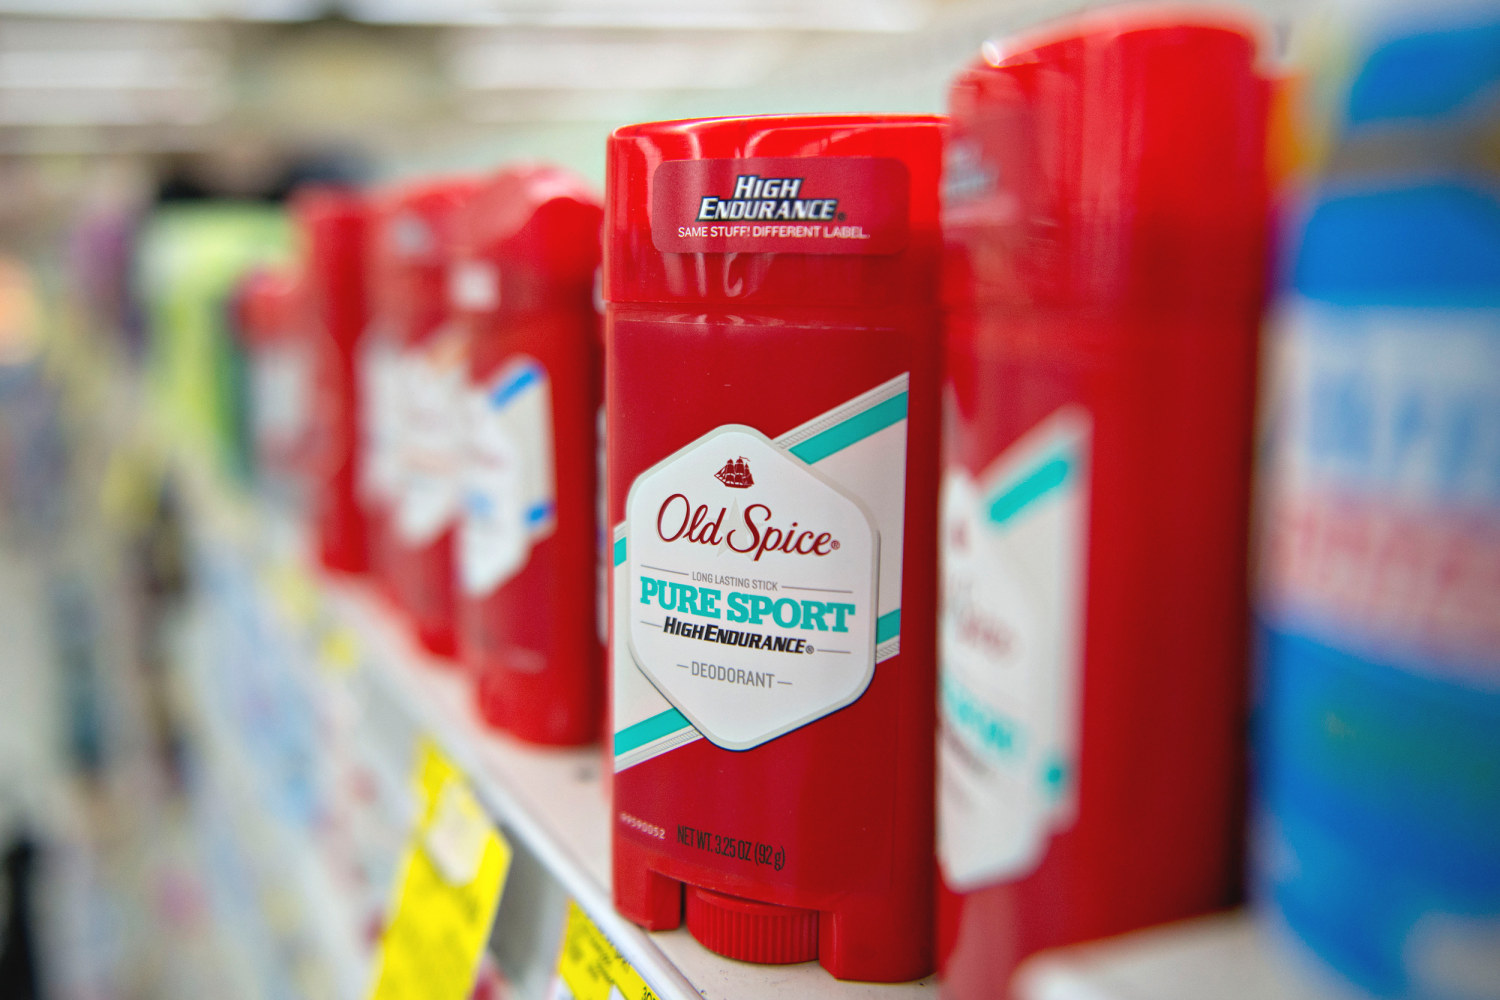 Old Spice Hit With Class Action Over Rashes